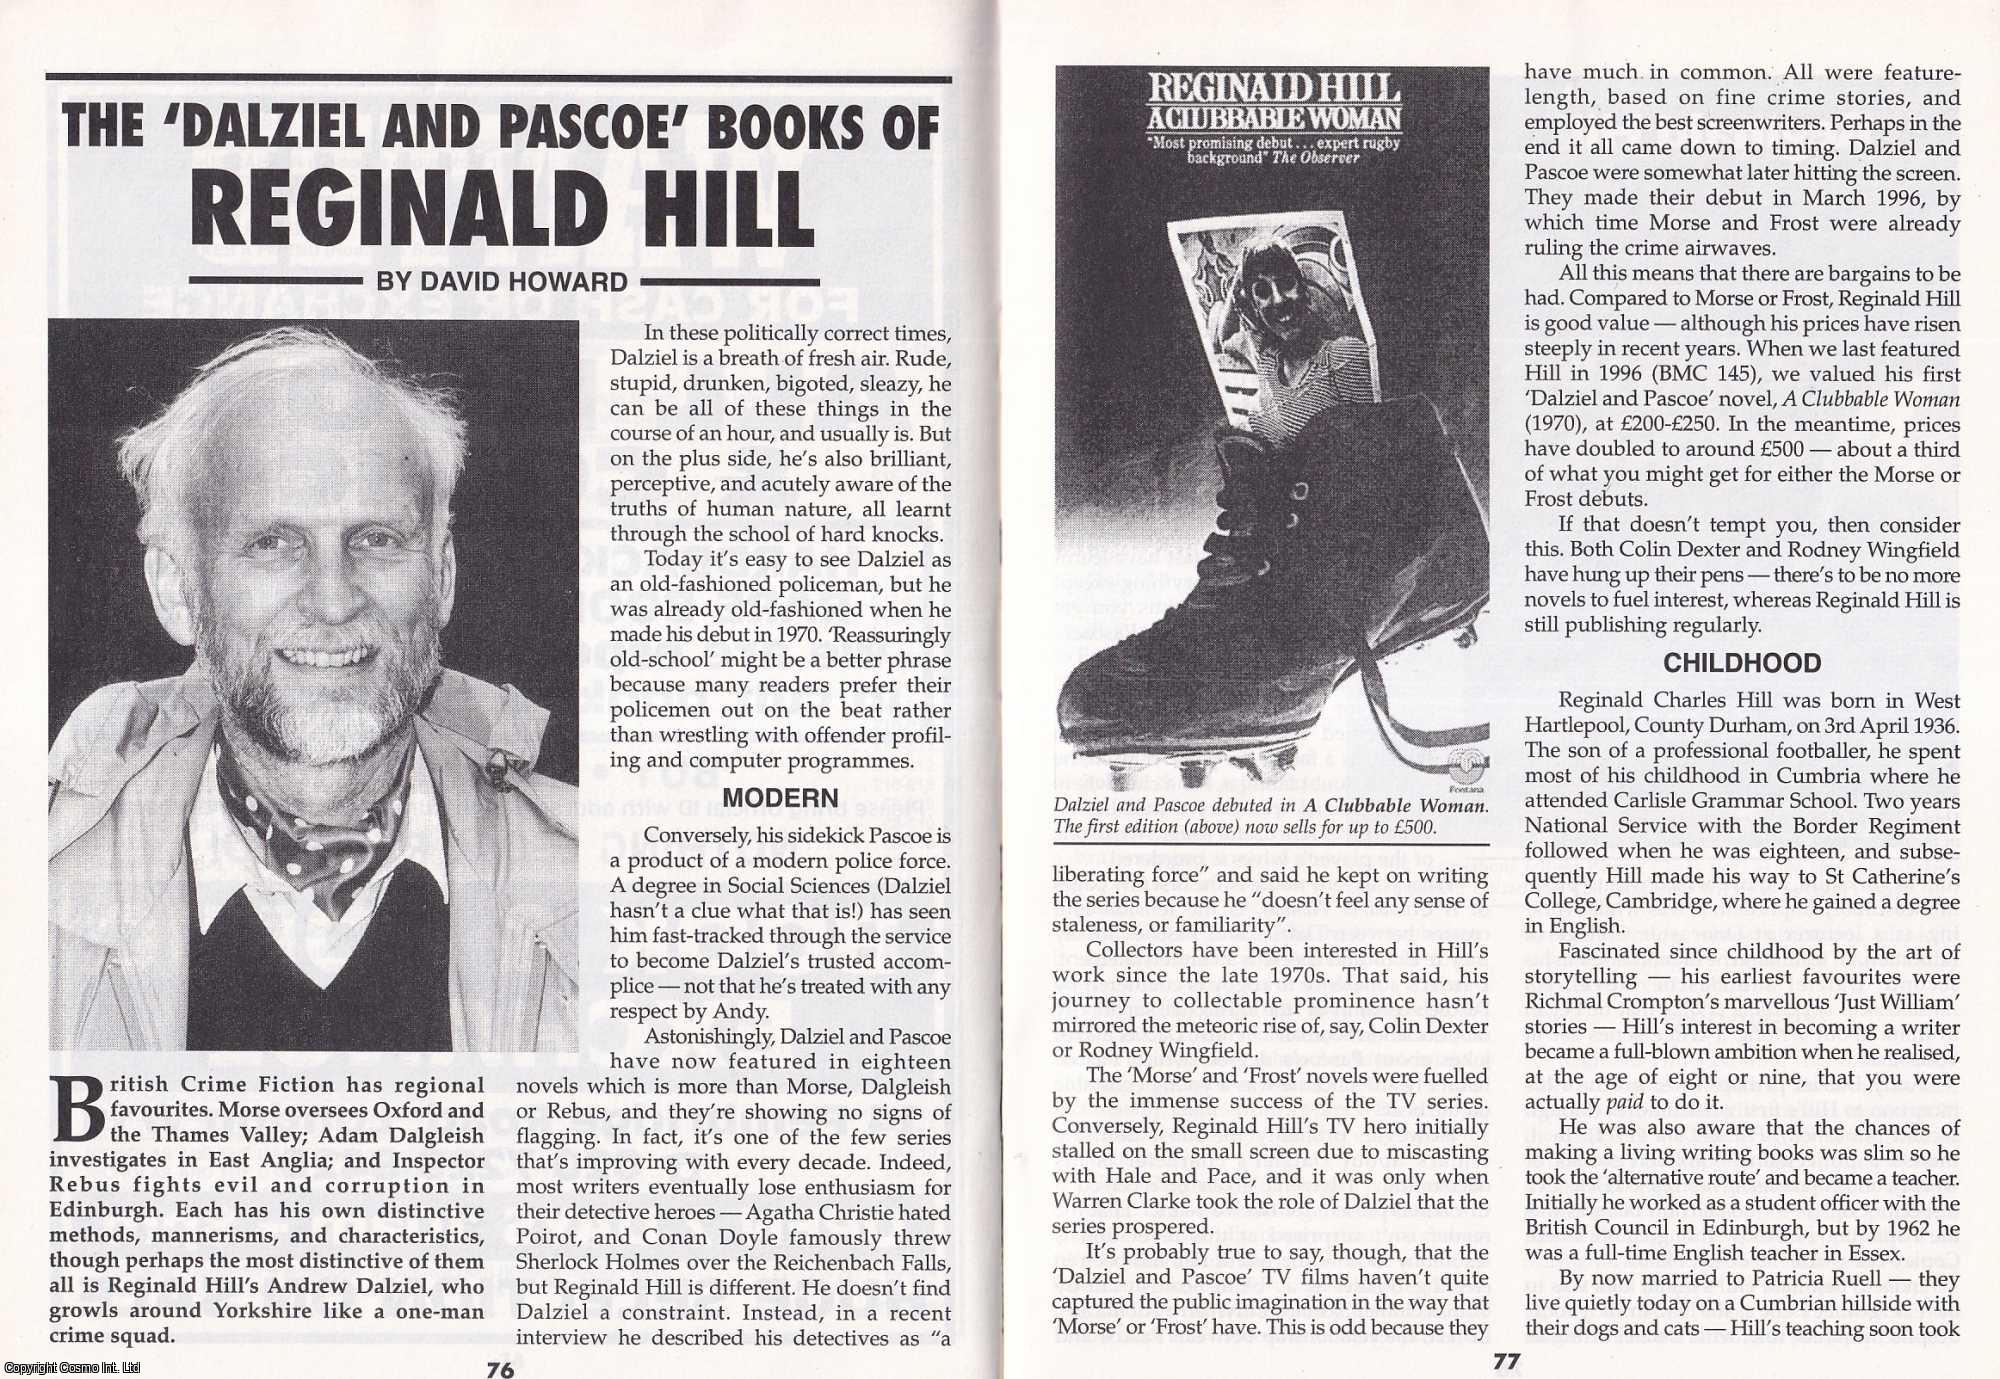 David Howard - The Dalziel and Pascoe Books of Reginald Hill. This is an original article separated from an issue of The Book & Magazine Collector publication, 2003.